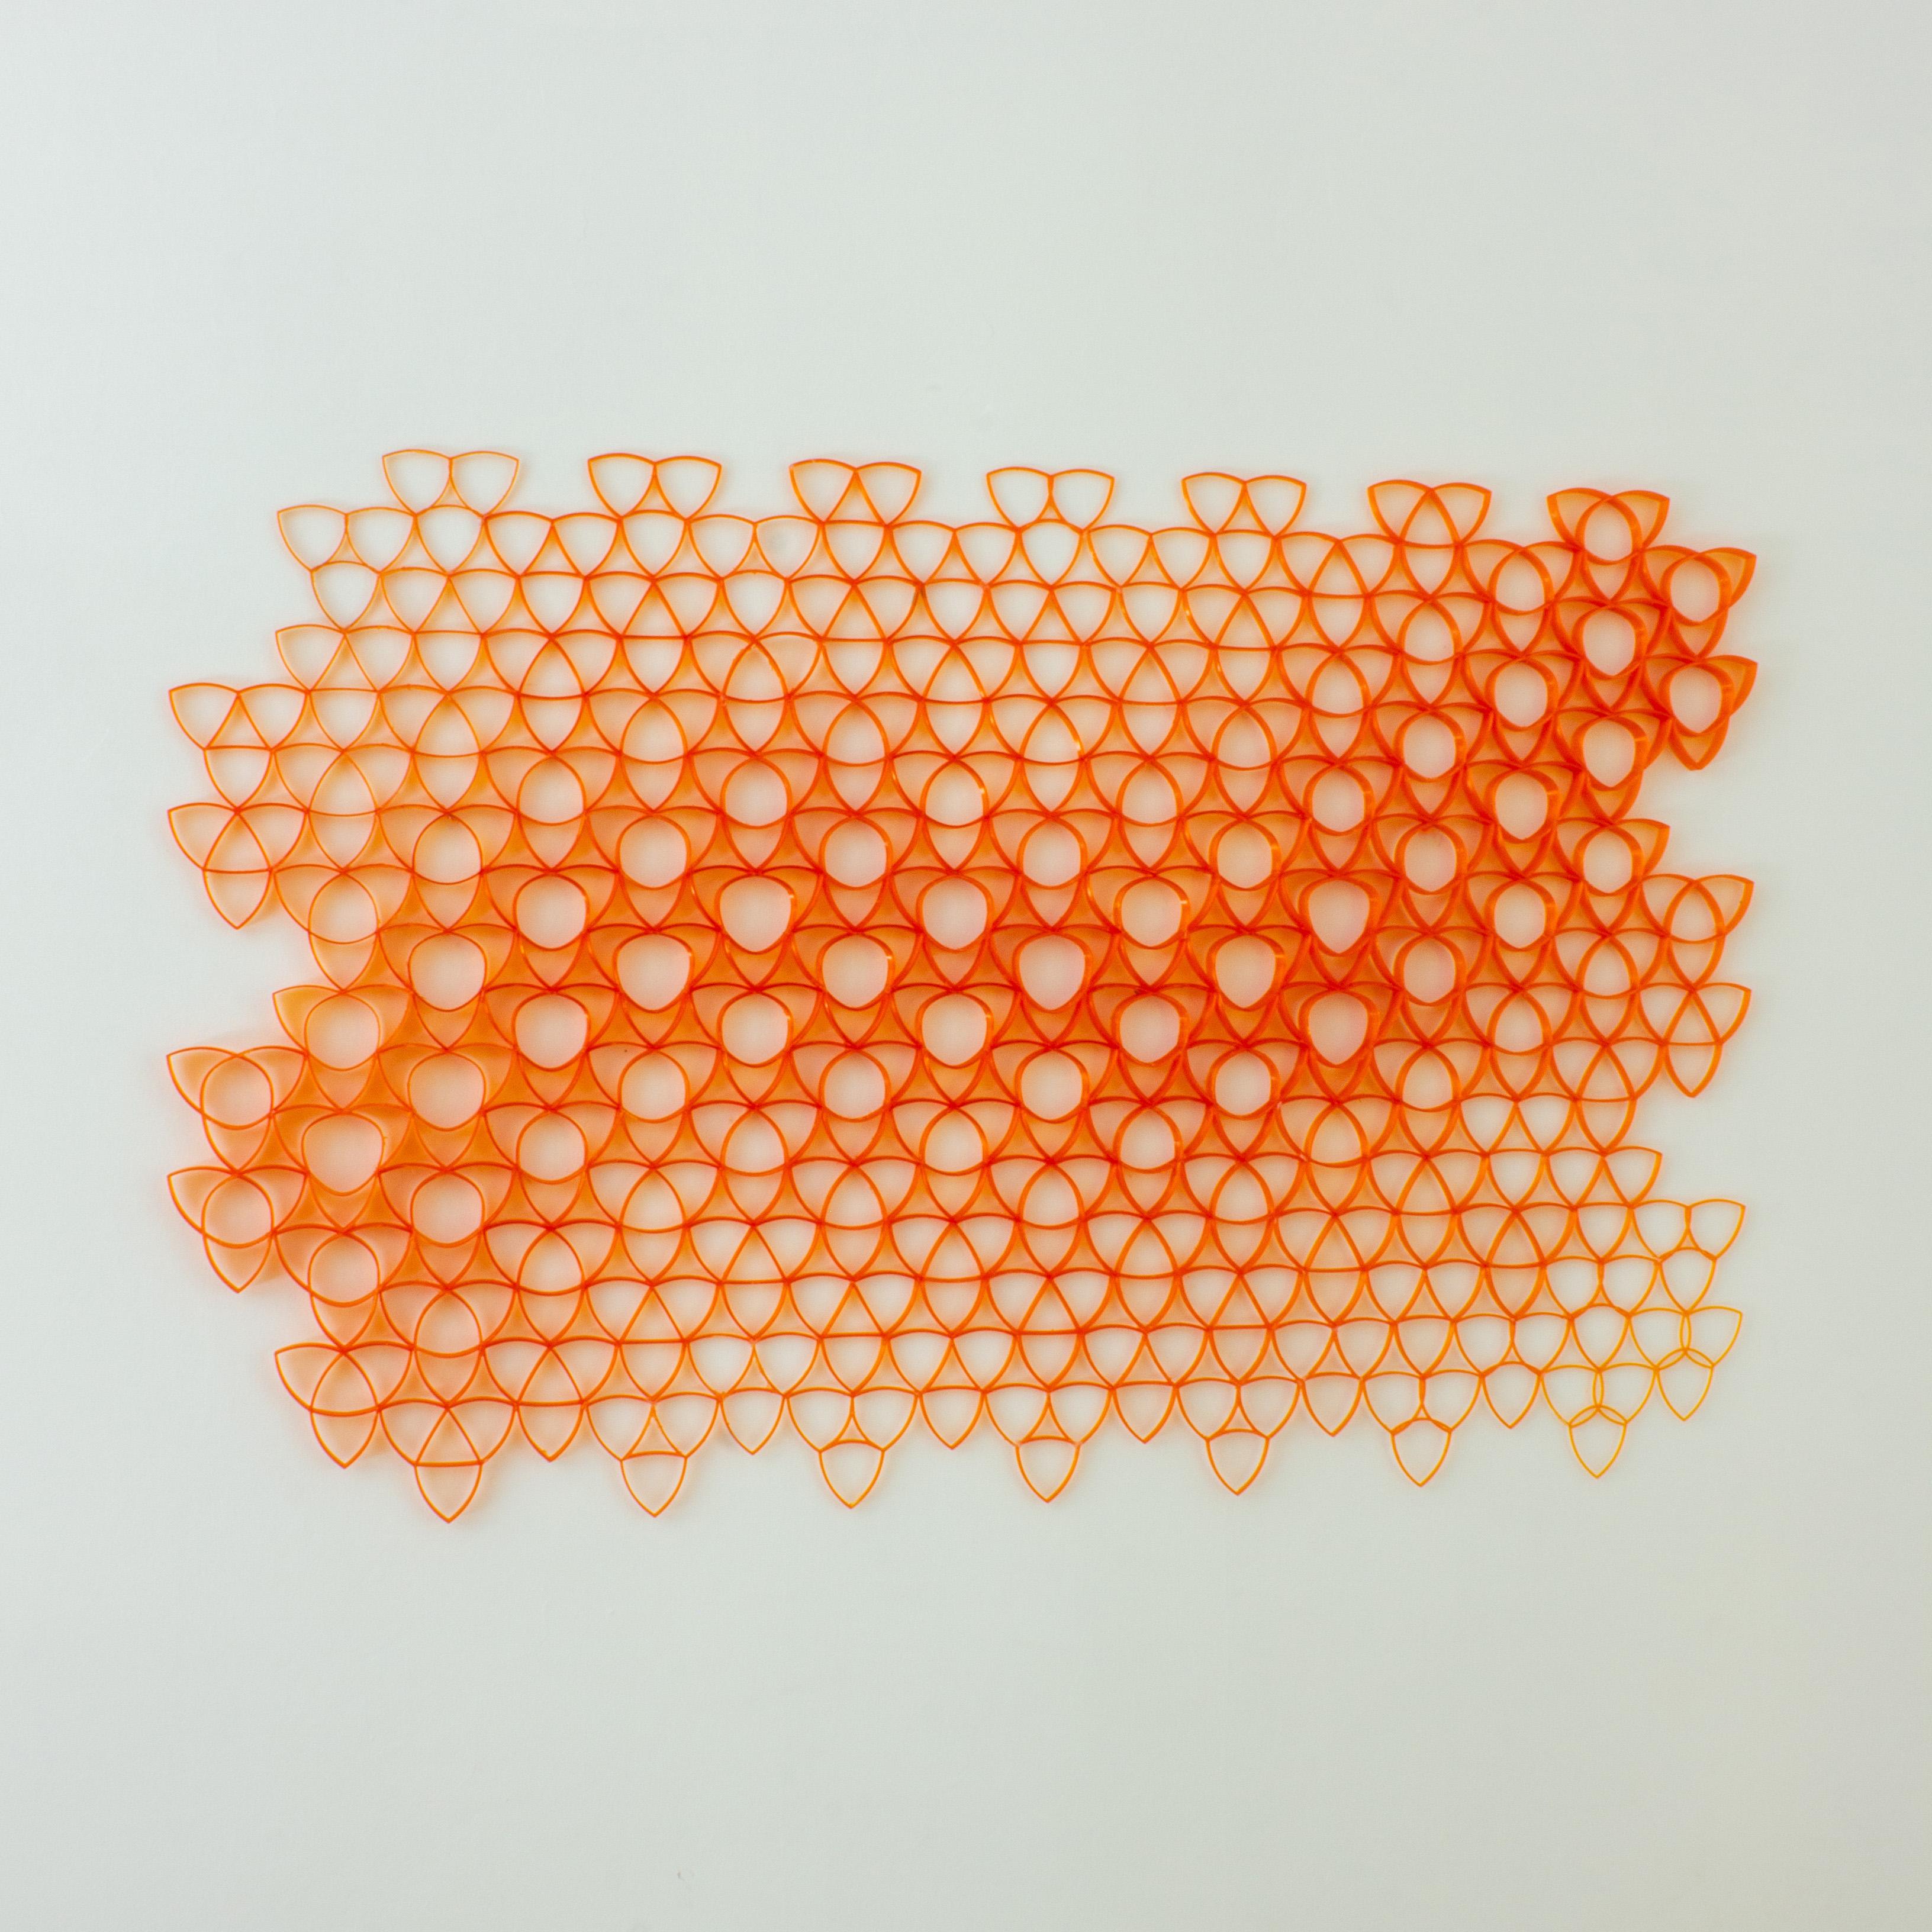 Parametric wall art, made from over 100 plastic PET bottles. 120 x 90 cm. (47 in x 35 in). The design follows a triangular geometric pattern that changes in scale proportionally as it traces a curved path. The pattern is 3D printed and meticulously